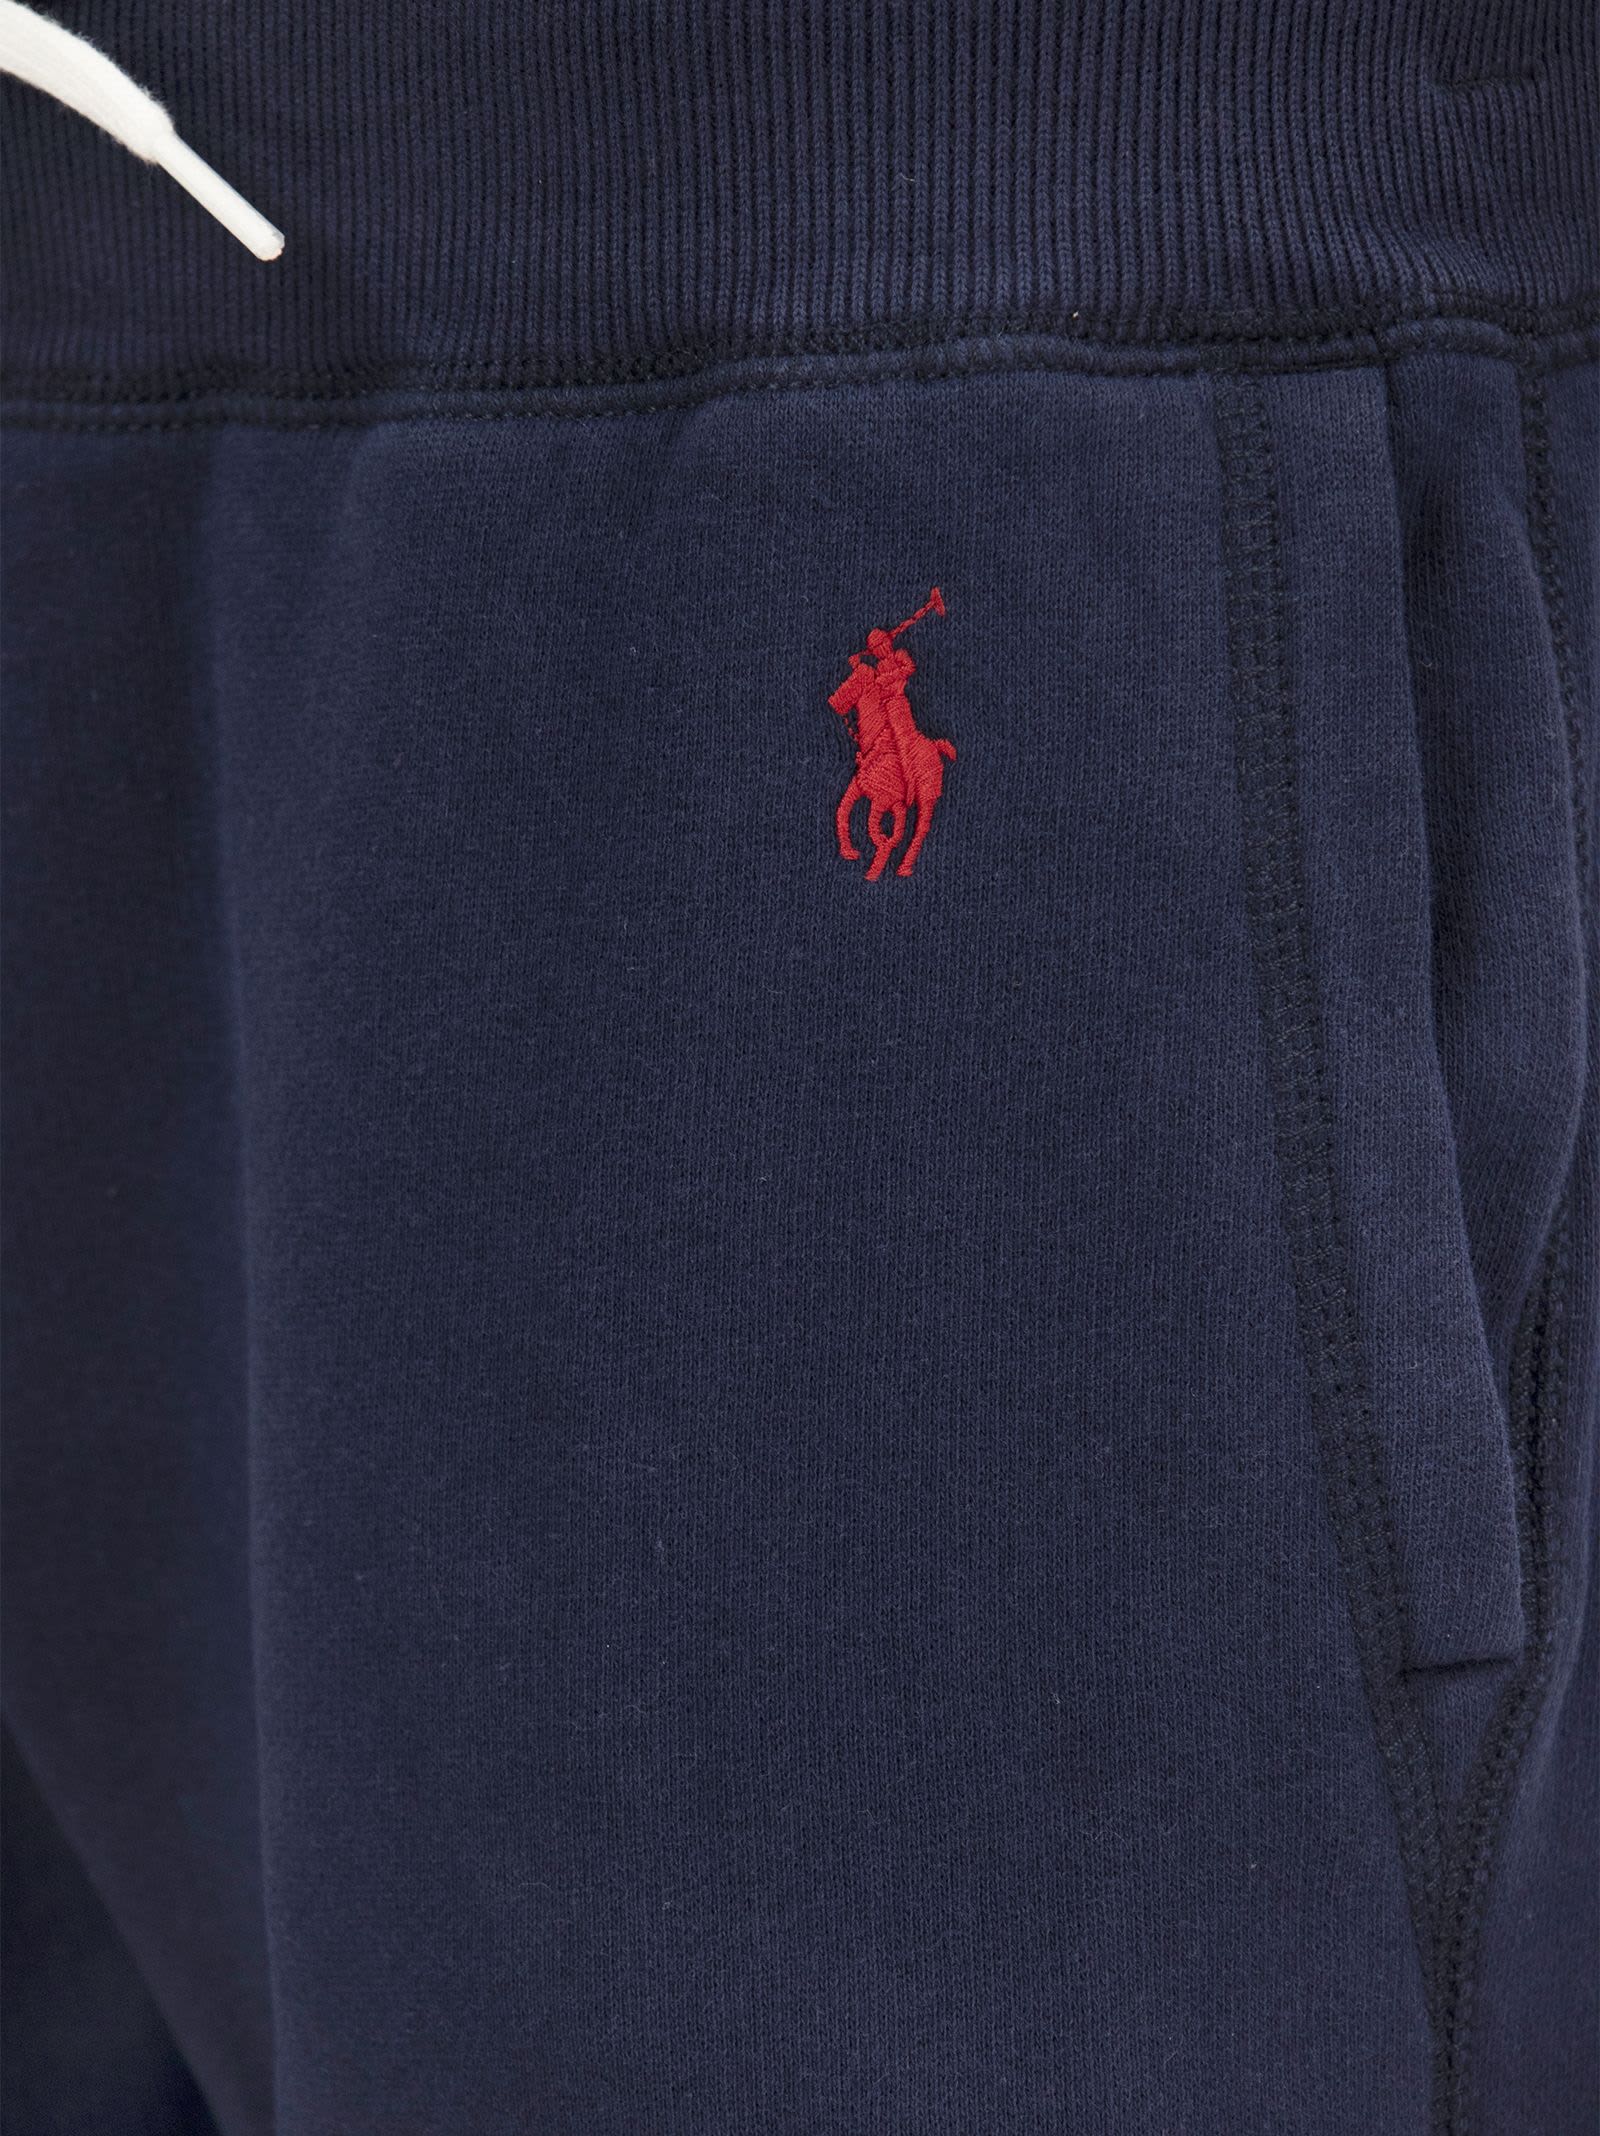 Shop Polo Ralph Lauren Sweat Jogging Trousers In Cruise Navy